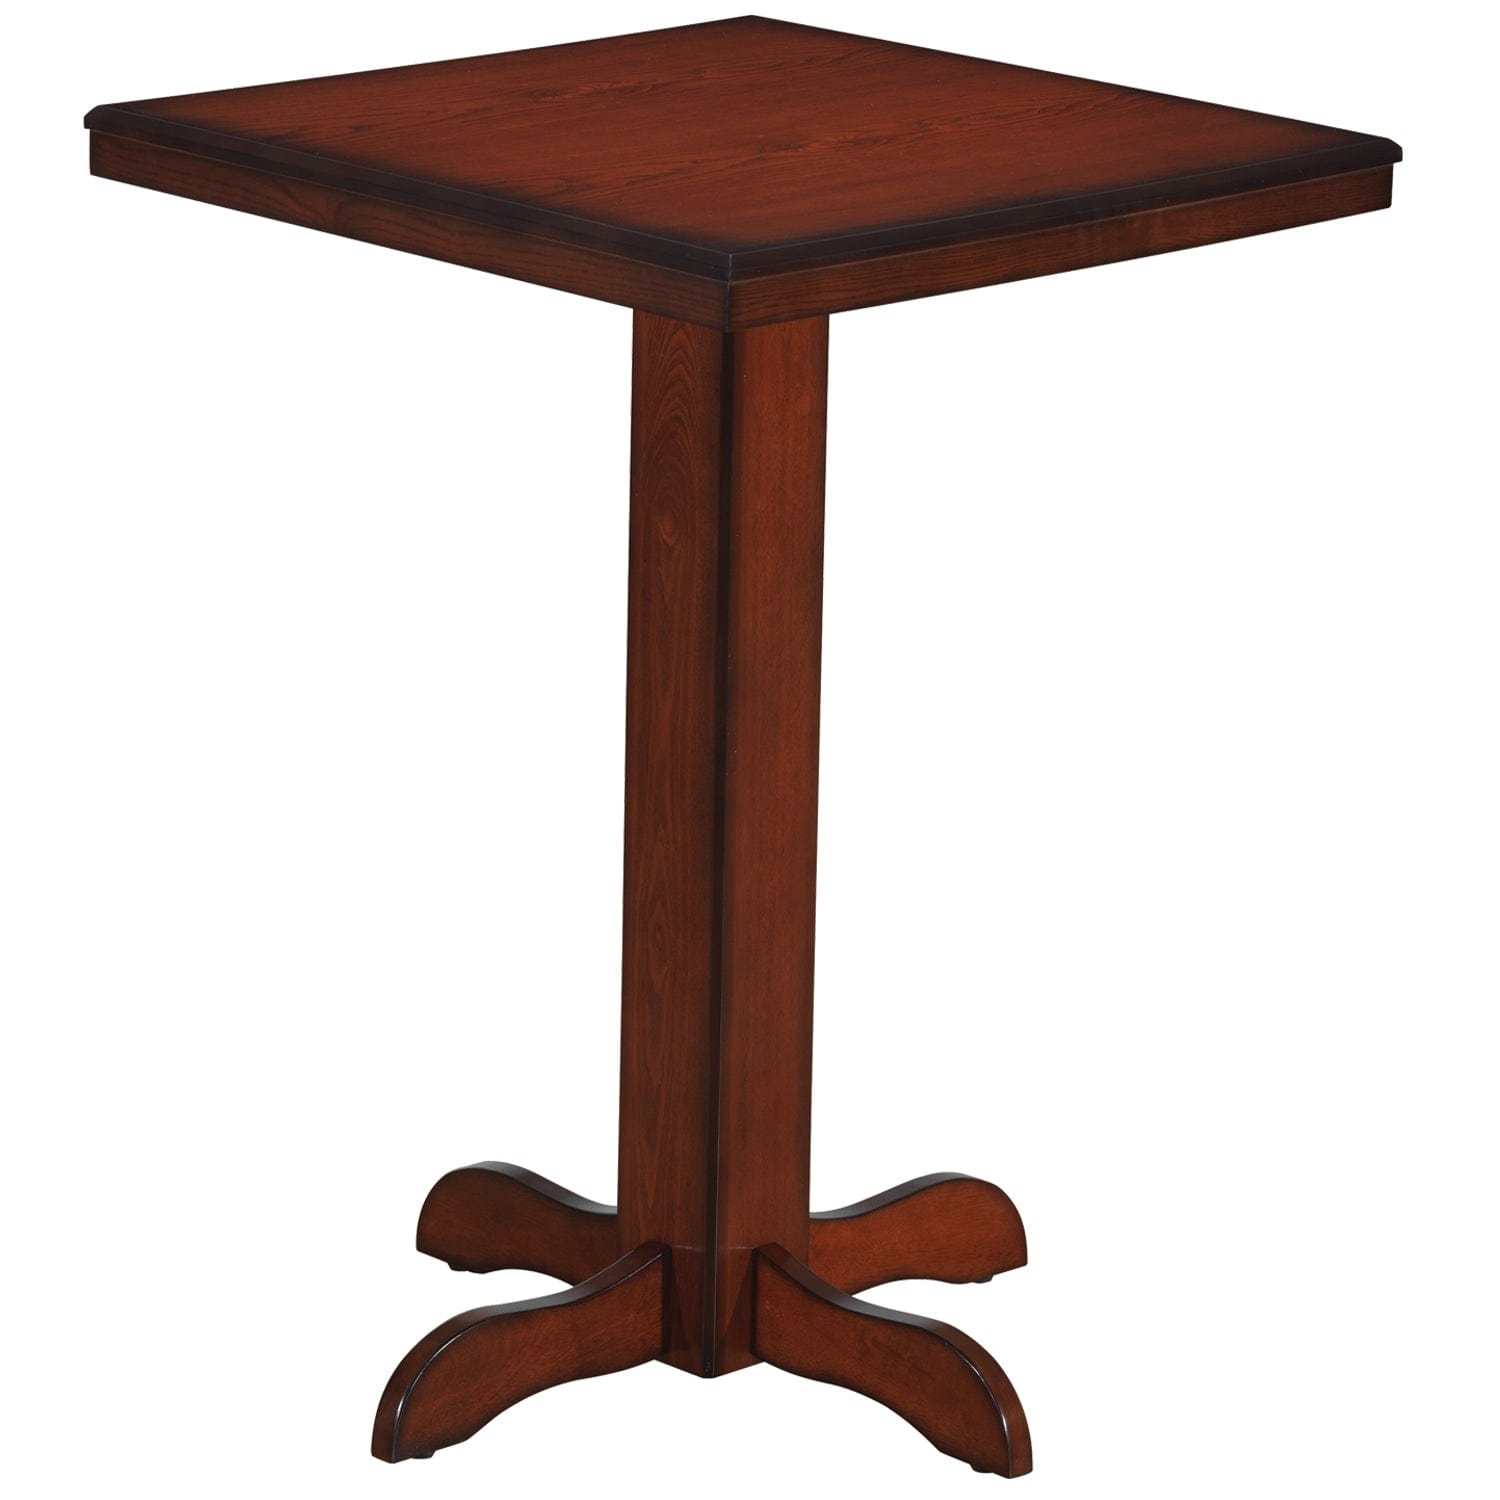 RAM Game Room Chestnut Square Pub Table - Atomic Game Store